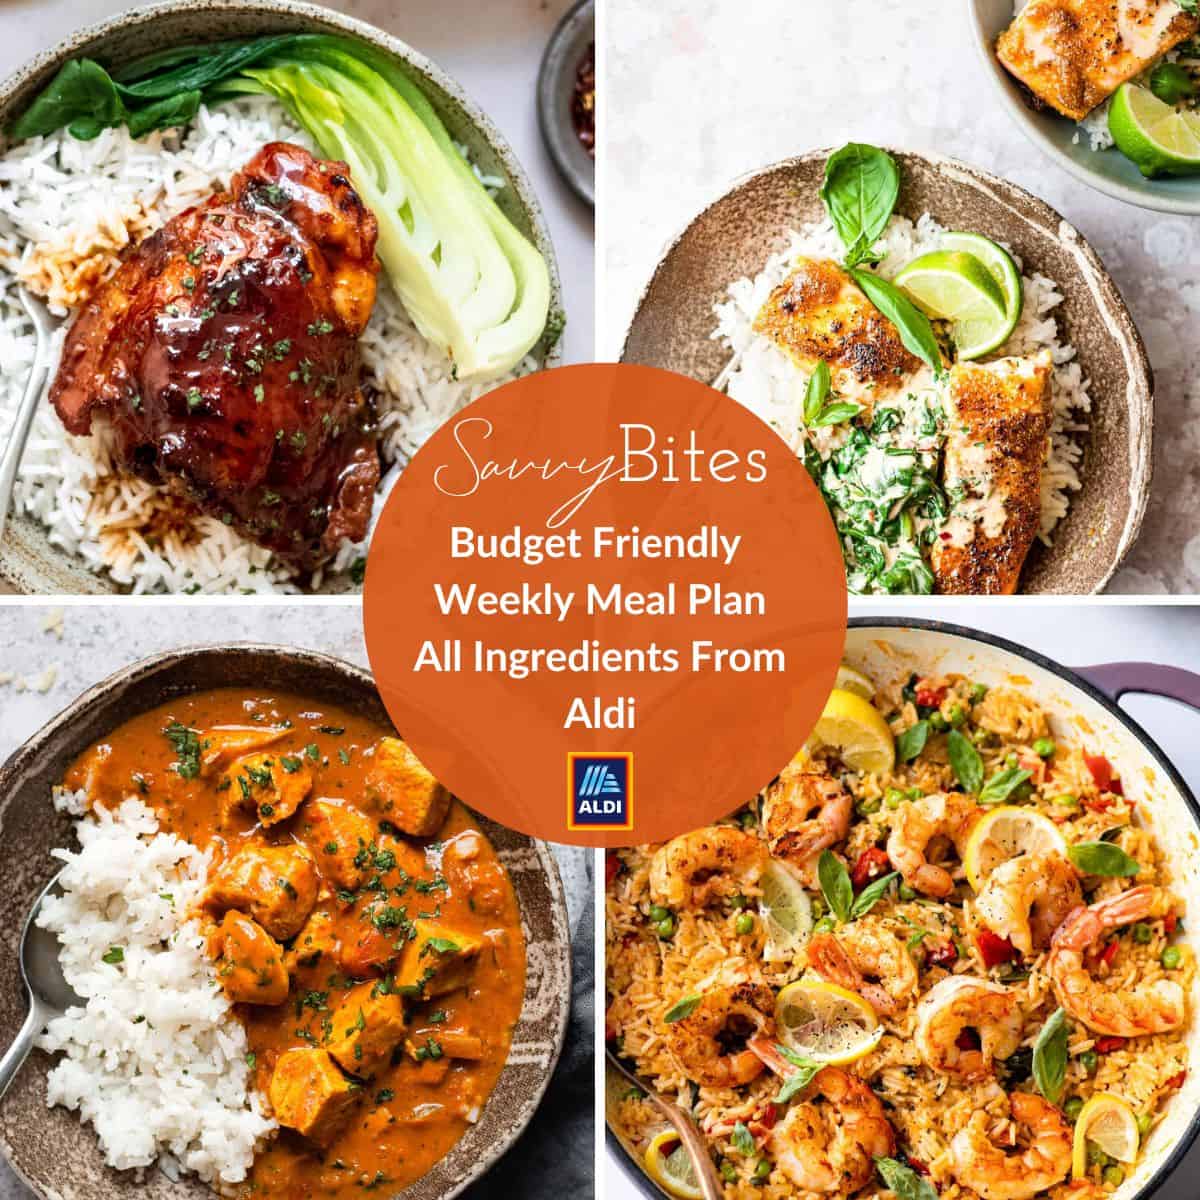 Family meal plan with text overlay.